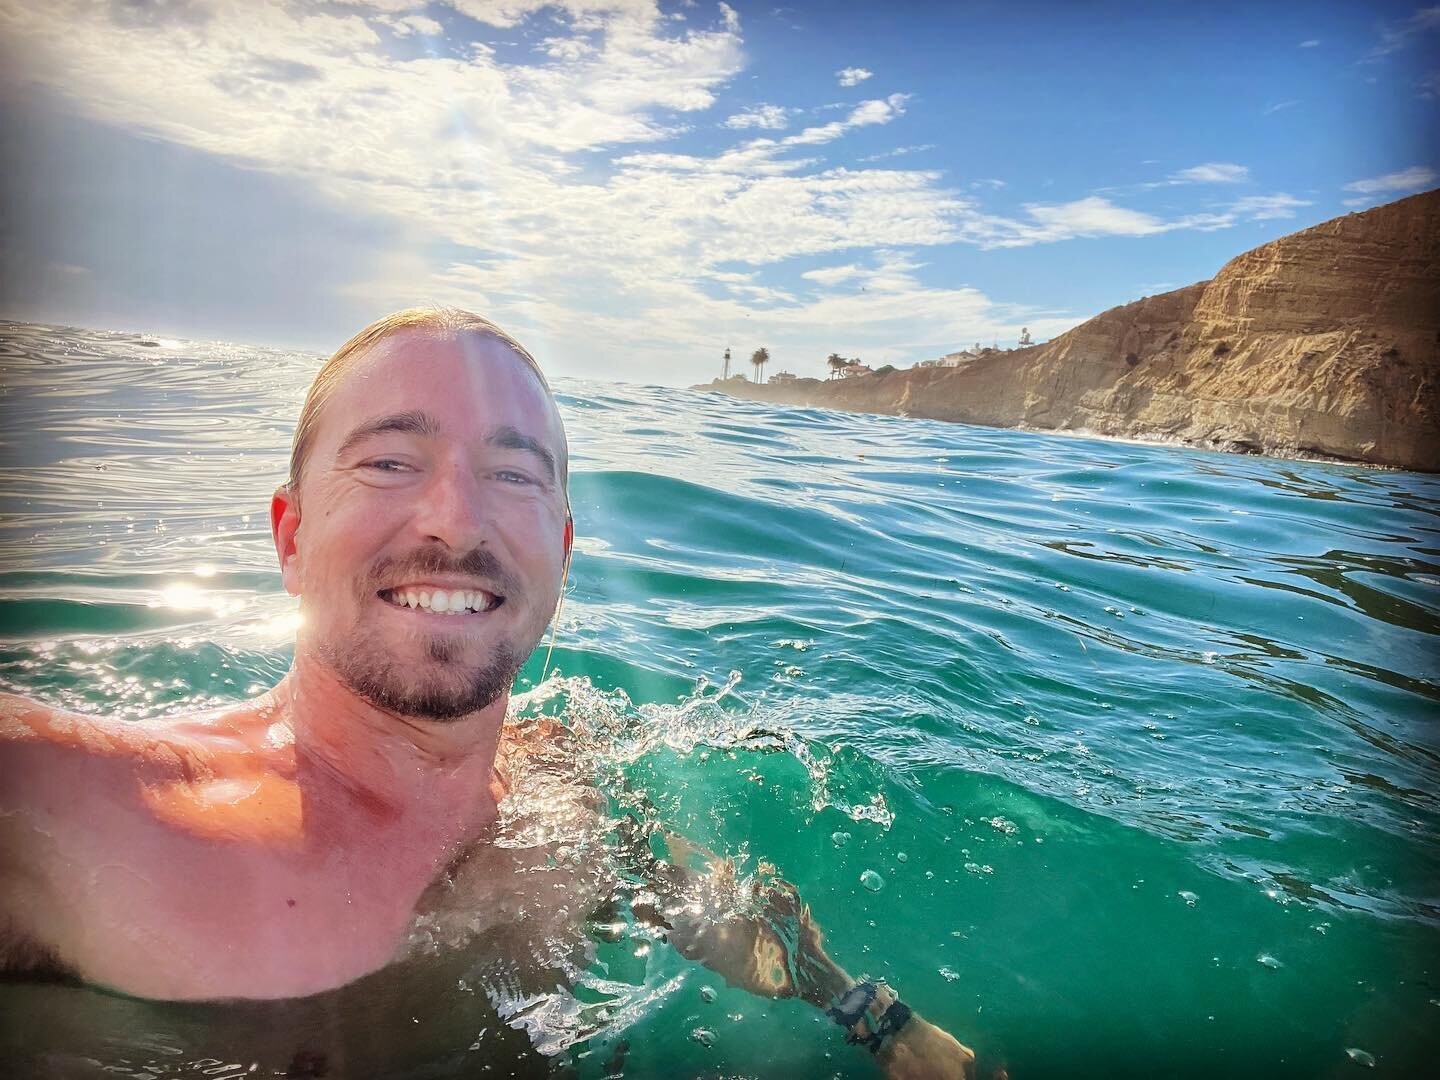 Swimming out past the point. The last few days I&rsquo;ve been so thankful to own boats! For as much work as they are they&rsquo;re worth the trouble when the weathers the way it&rsquo;s been.
.
.
.
.
.
.
#pointloma #sandiego #summertime #summer #hea